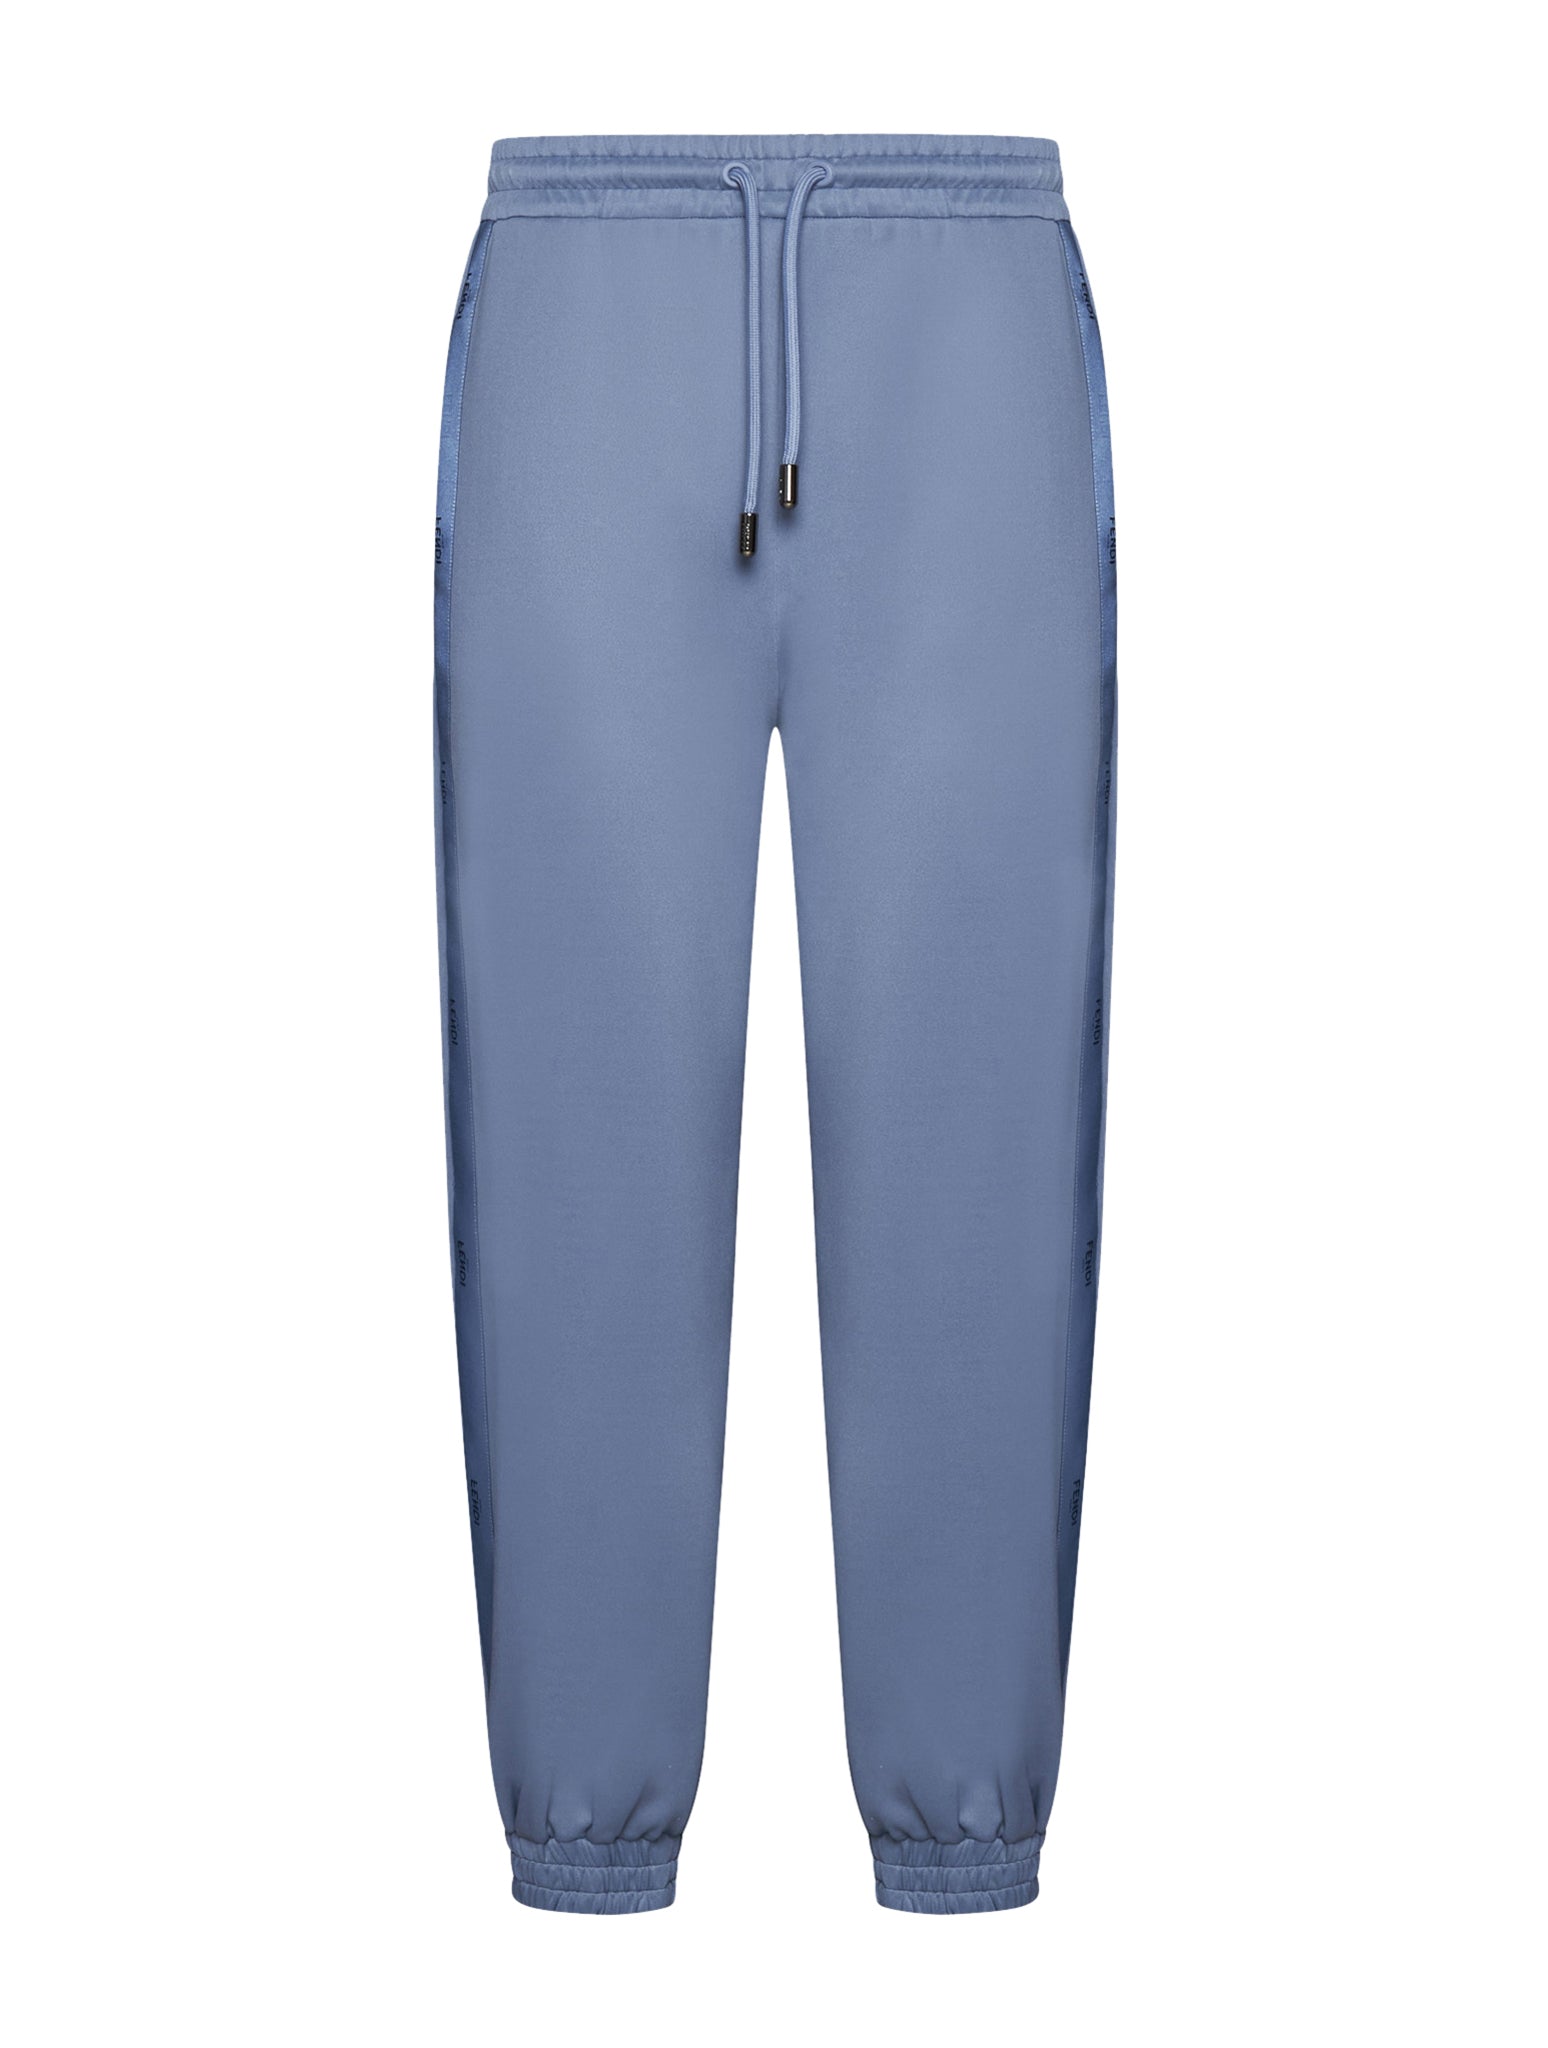 TRACKSUIT PANTS WITH DRAWSTRING AND LIGHT BLUE LOGO BAND IN POLYESTER WOMAN